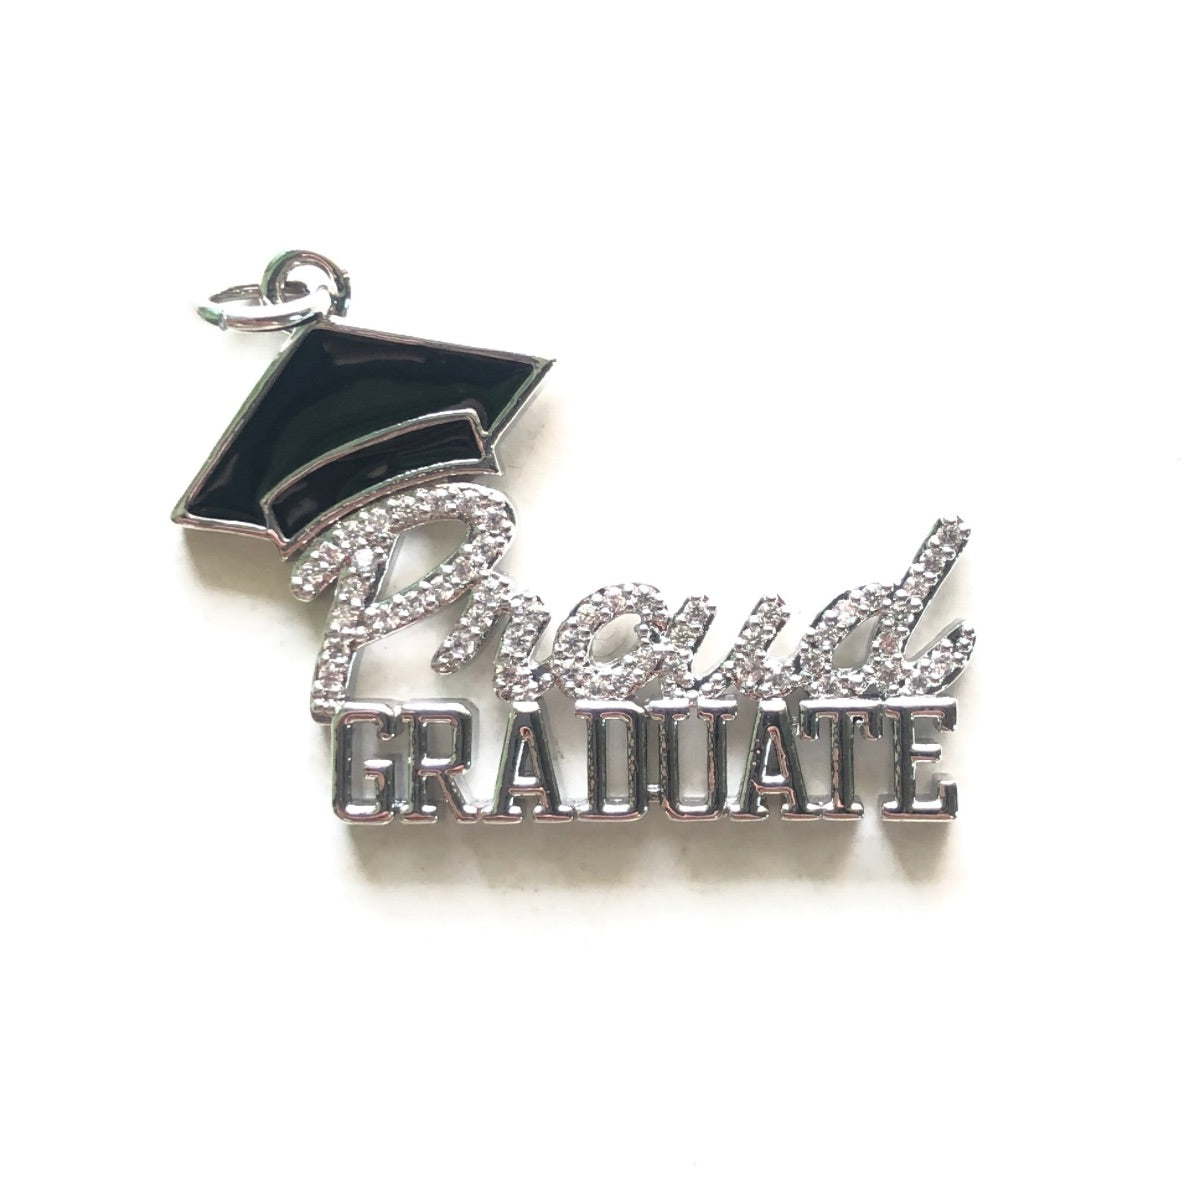 10pcs/lot 34.5*24.5mm CZ Pave Proud Graduate Word Charms for Graduation Silver CZ Paved Charms Graduation New Charms Arrivals Words & Quotes Charms Beads Beyond